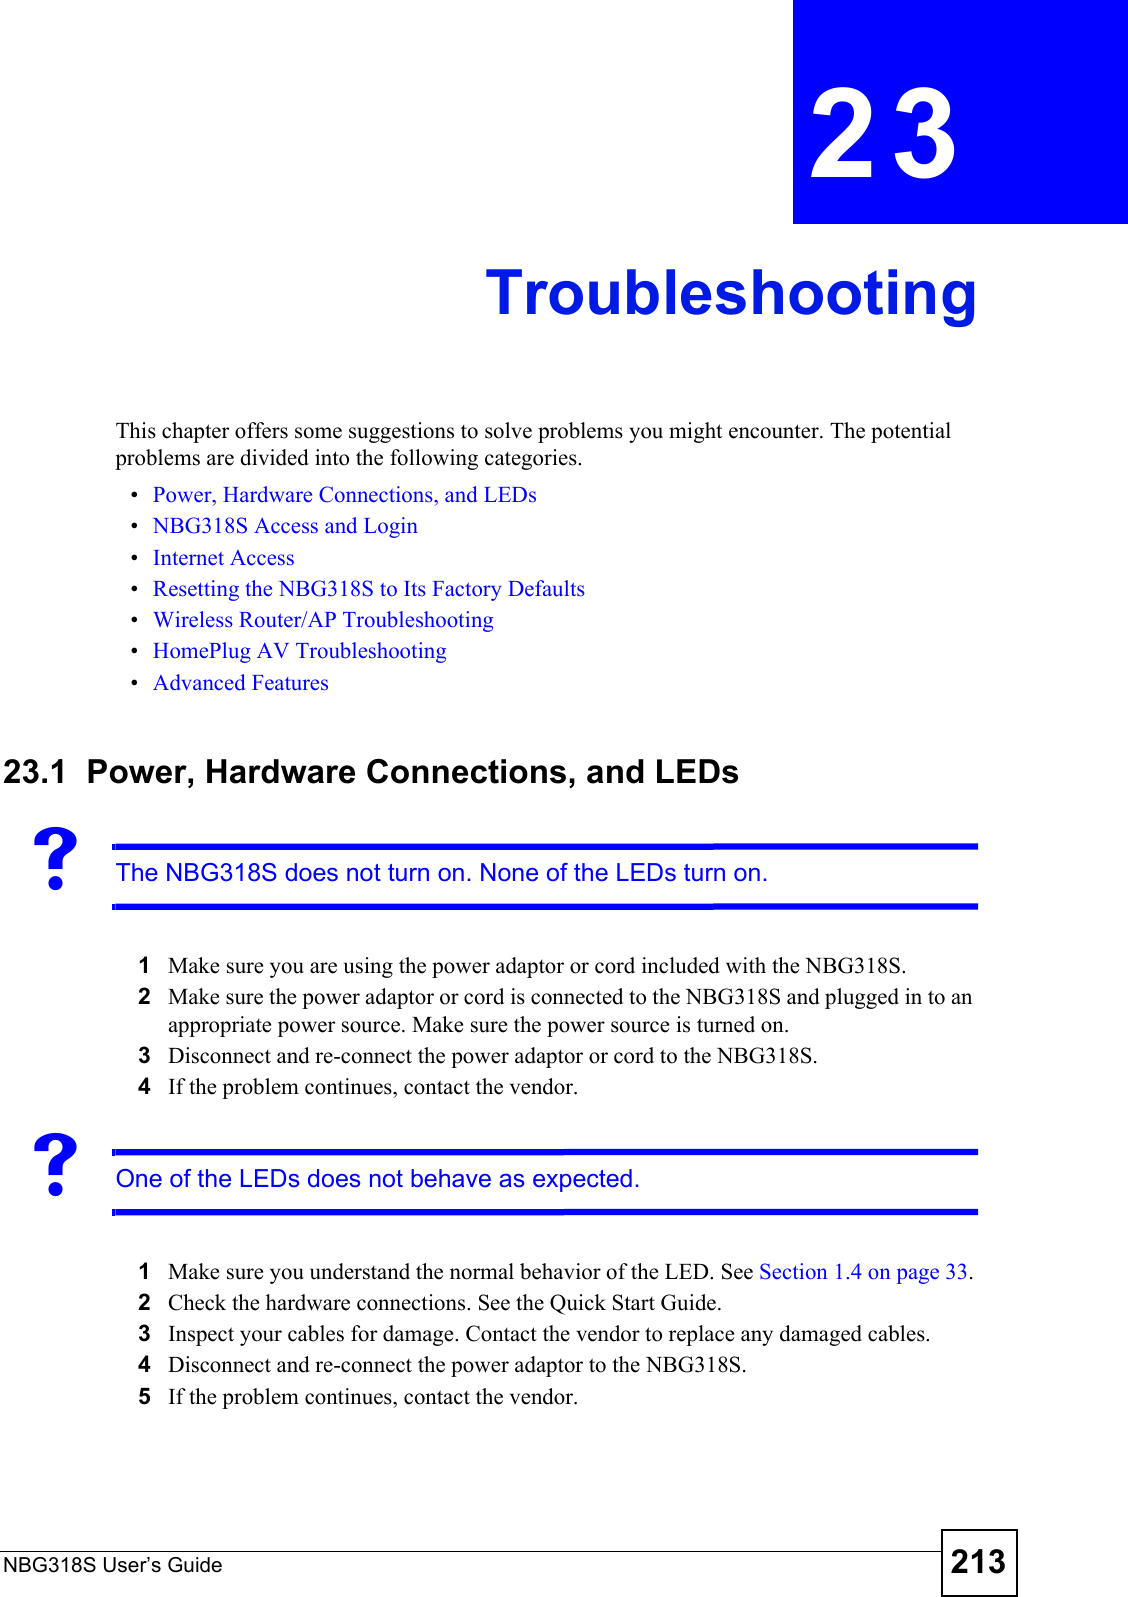 NBG318S User’s Guide 213CHAPTER  23 TroubleshootingThis chapter offers some suggestions to solve problems you might encounter. The potential problems are divided into the following categories. •Power, Hardware Connections, and LEDs•NBG318S Access and Login•Internet Access•Resetting the NBG318S to Its Factory Defaults•Wireless Router/AP Troubleshooting•HomePlug AV Troubleshooting•Advanced Features23.1  Power, Hardware Connections, and LEDsVThe NBG318S does not turn on. None of the LEDs turn on.1Make sure you are using the power adaptor or cord included with the NBG318S.2Make sure the power adaptor or cord is connected to the NBG318S and plugged in to an appropriate power source. Make sure the power source is turned on.3Disconnect and re-connect the power adaptor or cord to the NBG318S. 4If the problem continues, contact the vendor.VOne of the LEDs does not behave as expected.1Make sure you understand the normal behavior of the LED. See Section 1.4 on page 33.2Check the hardware connections. See the Quick Start Guide. 3Inspect your cables for damage. Contact the vendor to replace any damaged cables.4Disconnect and re-connect the power adaptor to the NBG318S. 5If the problem continues, contact the vendor.